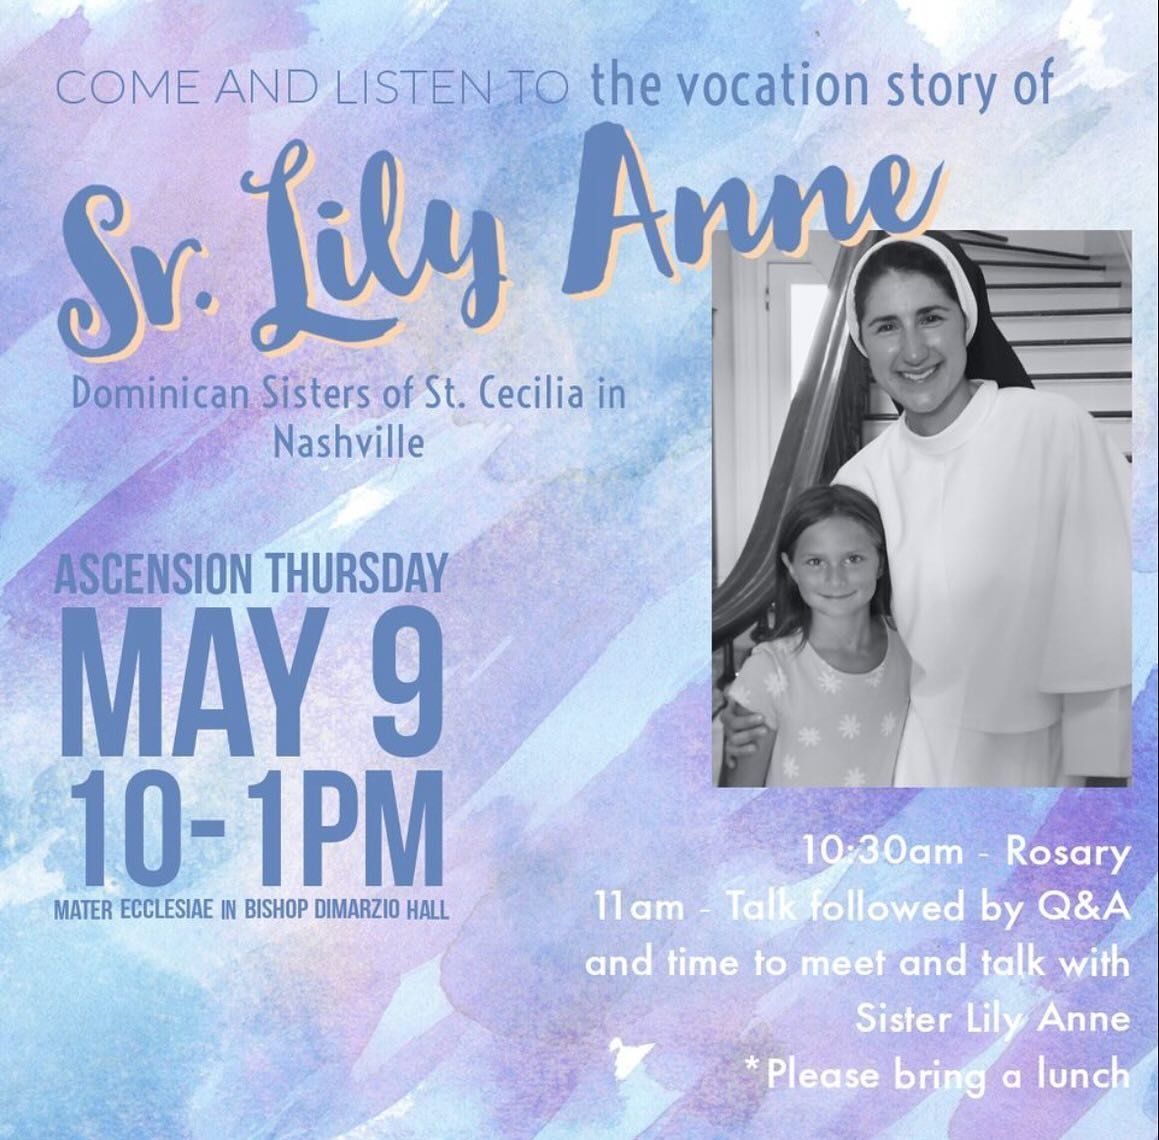 Two great local talks next Thursday, May 9th that students &amp; parishioners are invited to attend! 

Sr. Lily Anne was the former Campus Minister at Rowan&rsquo;s Newman House. Dr. Stephen Barr is the Society of Catholic Scientists, President and P